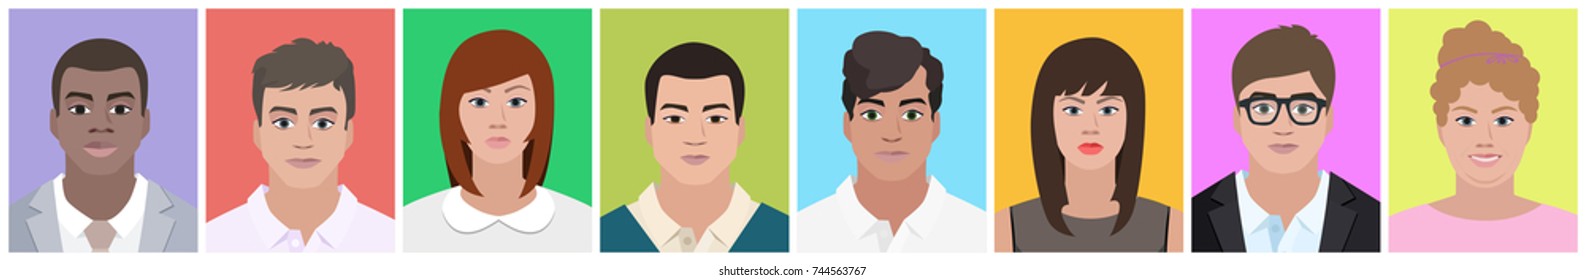 pictures of different people, vector illustration